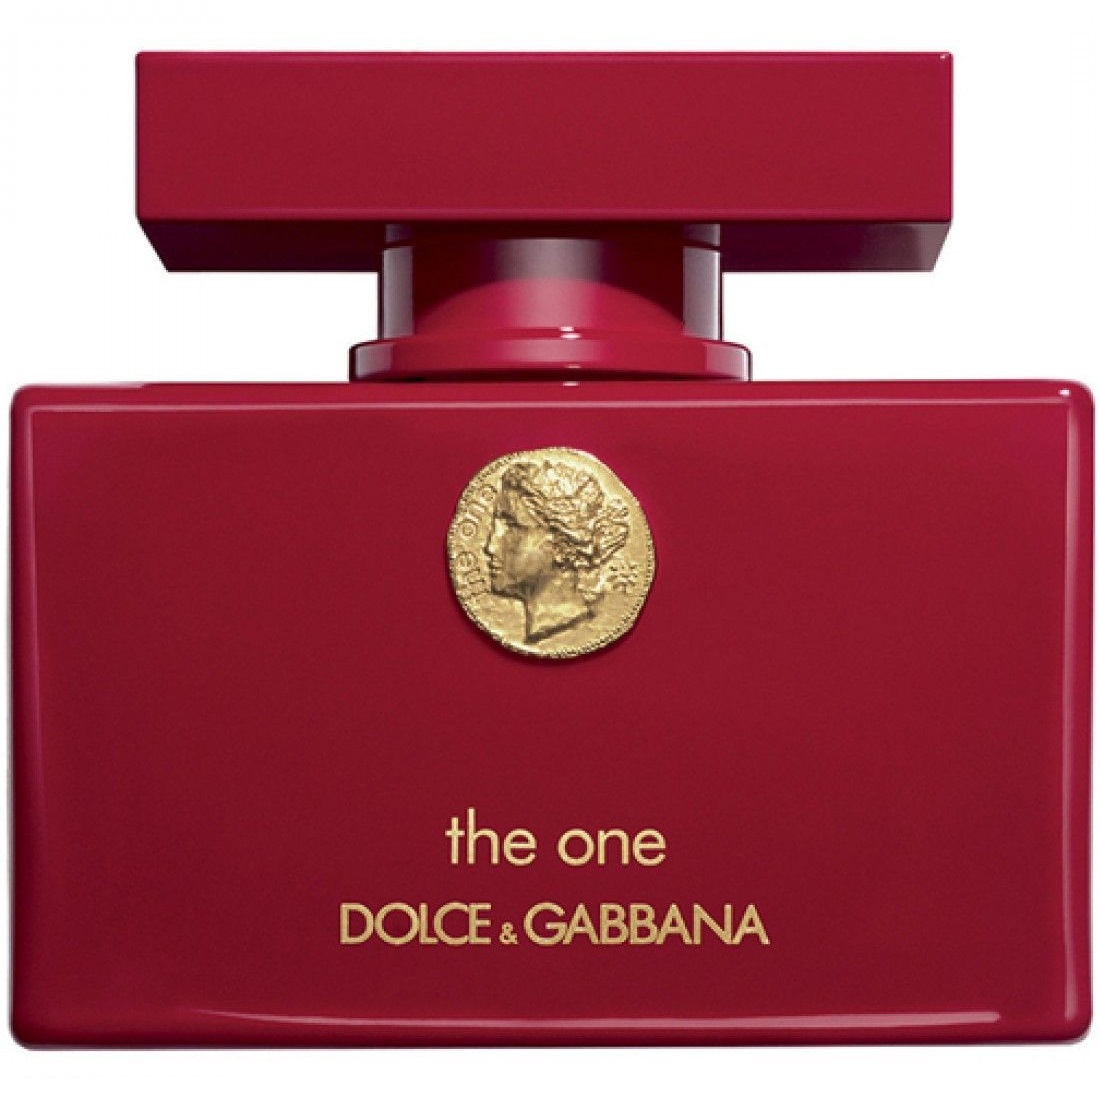 Производитель dolce. D&G the one Collector s Edition жен 75ml EDP 2014г.. Dolce Gabbana the one Collector Edition. Дольче Габбана the one 50 мл женские. Дольче Габбана 2014 Парфюм.